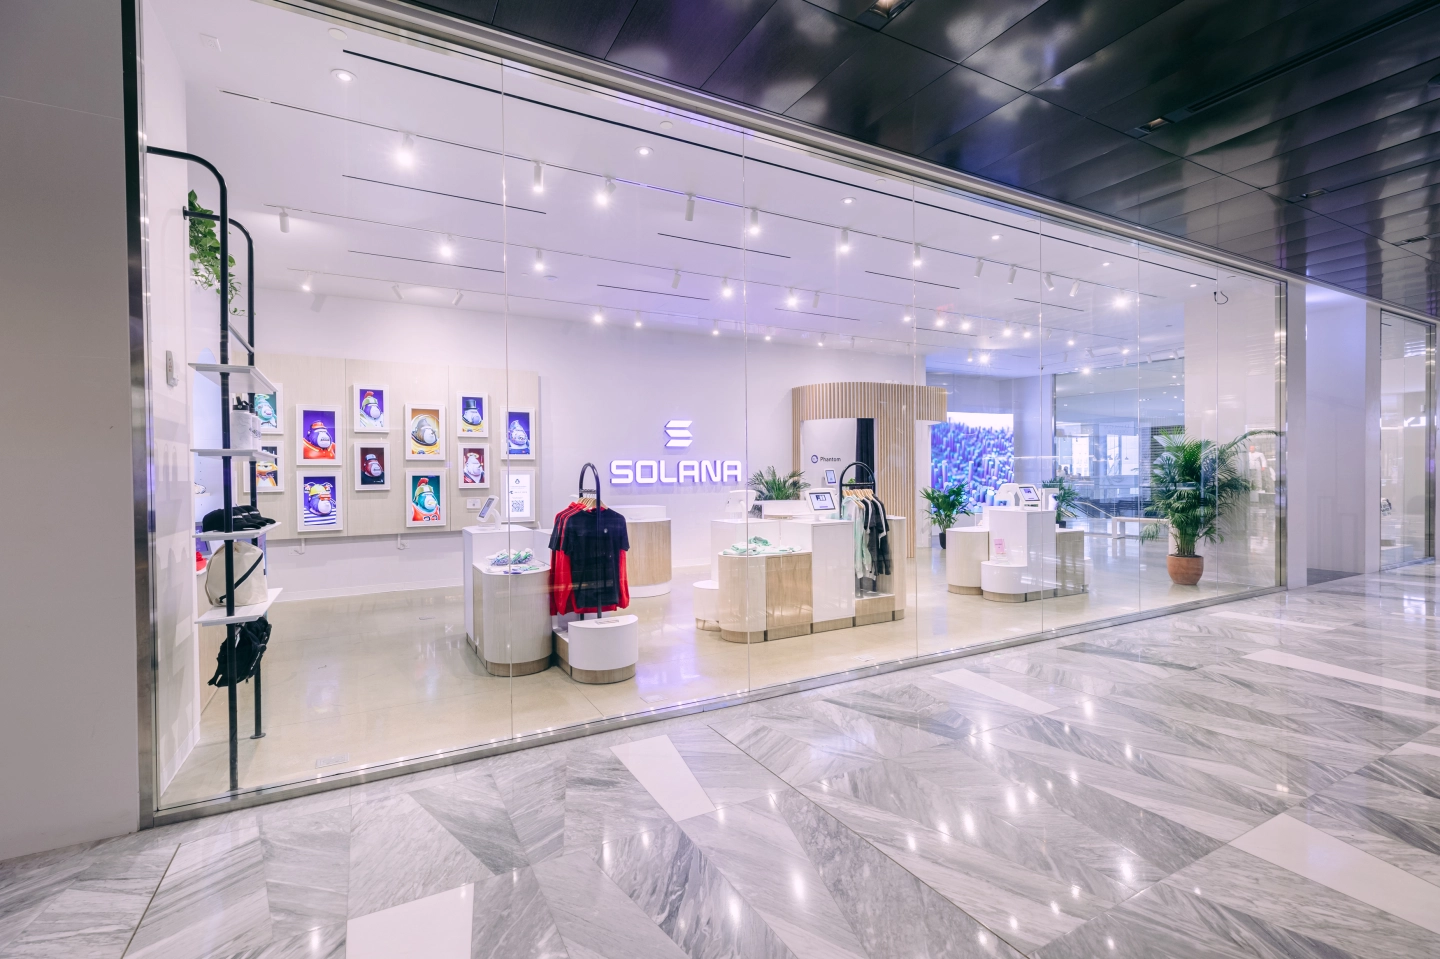 Solana’s new retail store in NYC that looks exactly like Apple’s - From Fortune’s early look at Solana Spaces.